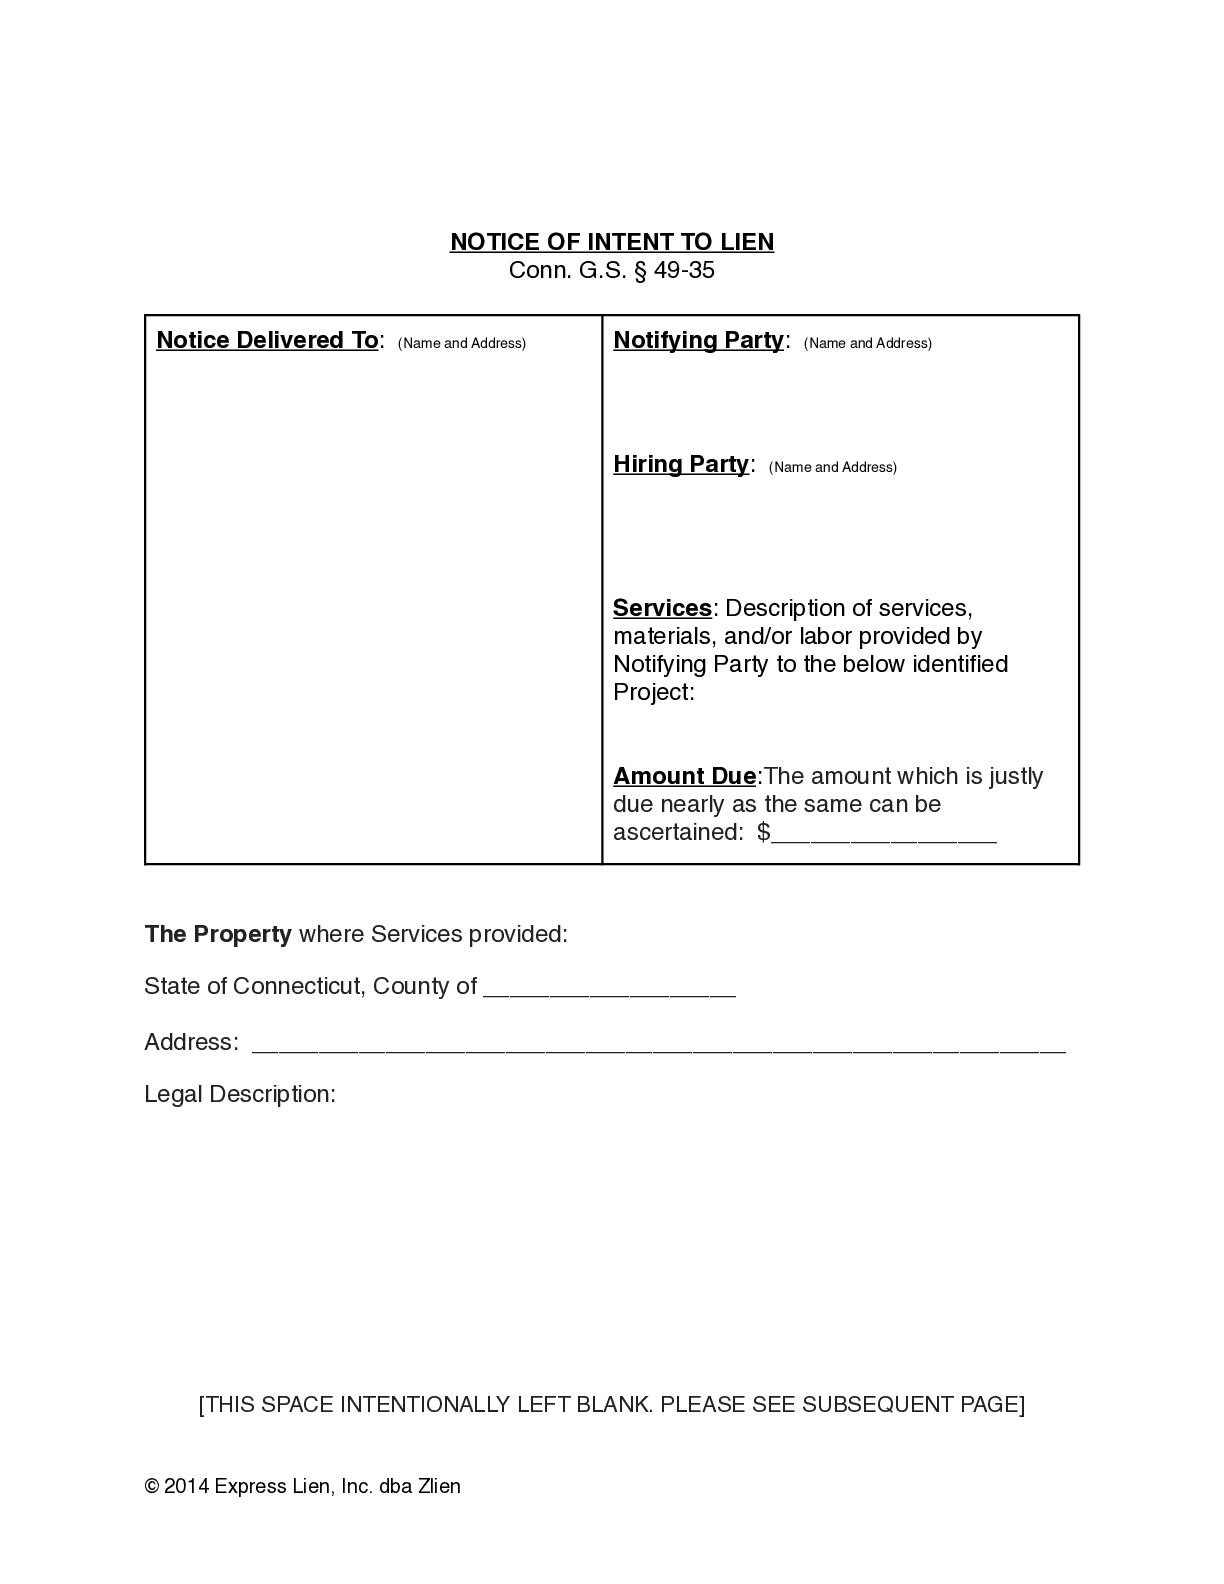 Connecticut Notice of Intent to Lien Form | Free Downloadable Template - free from